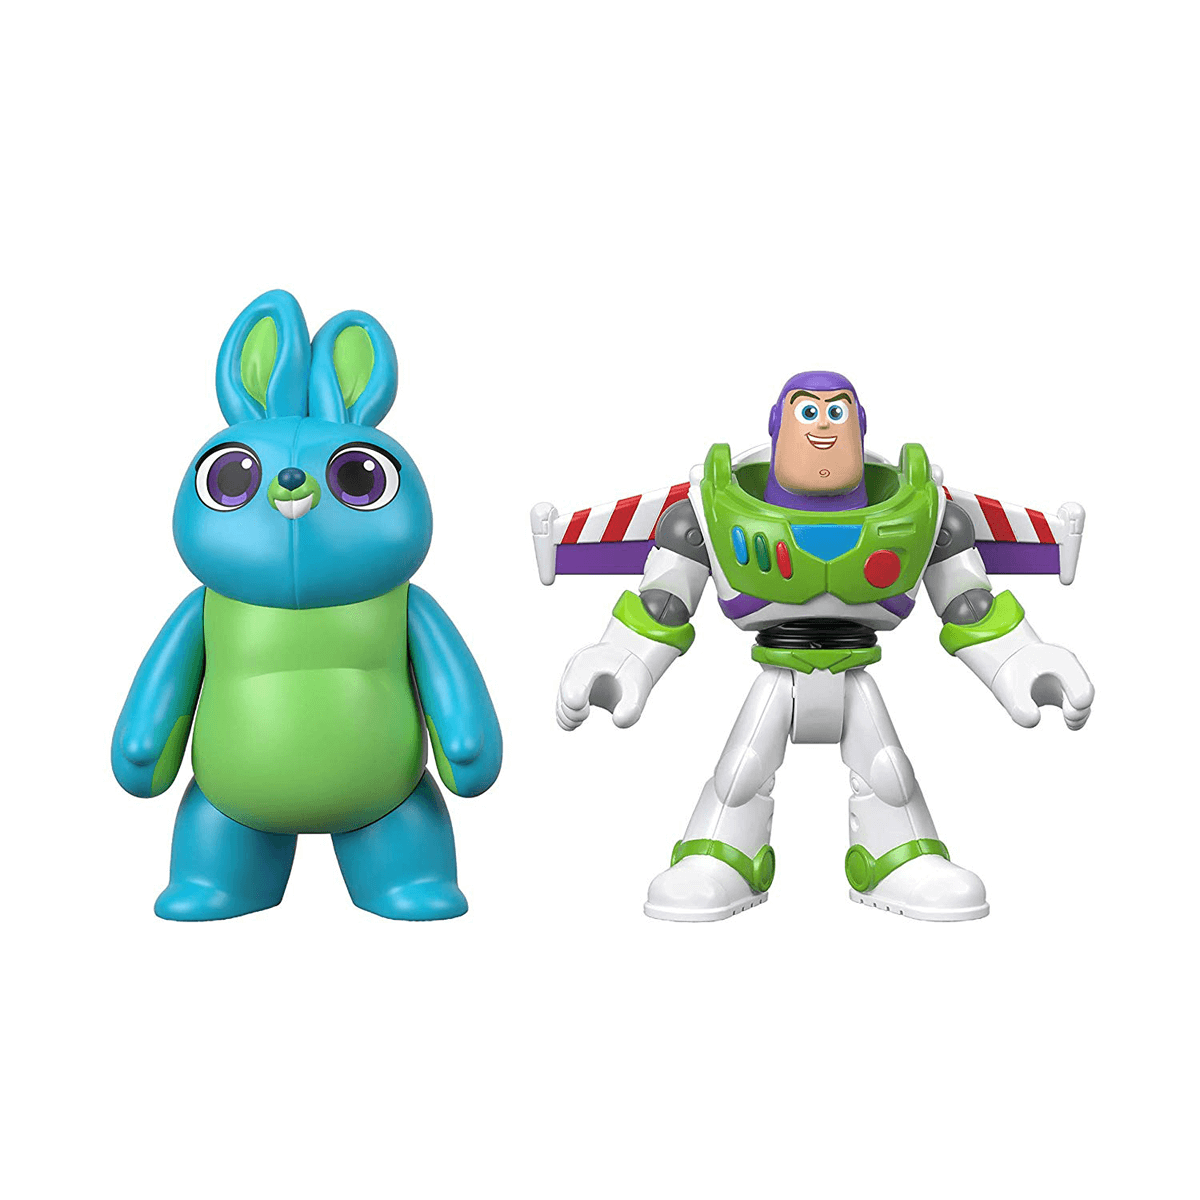 Imaginext Toy Story 4 Figure Packs2